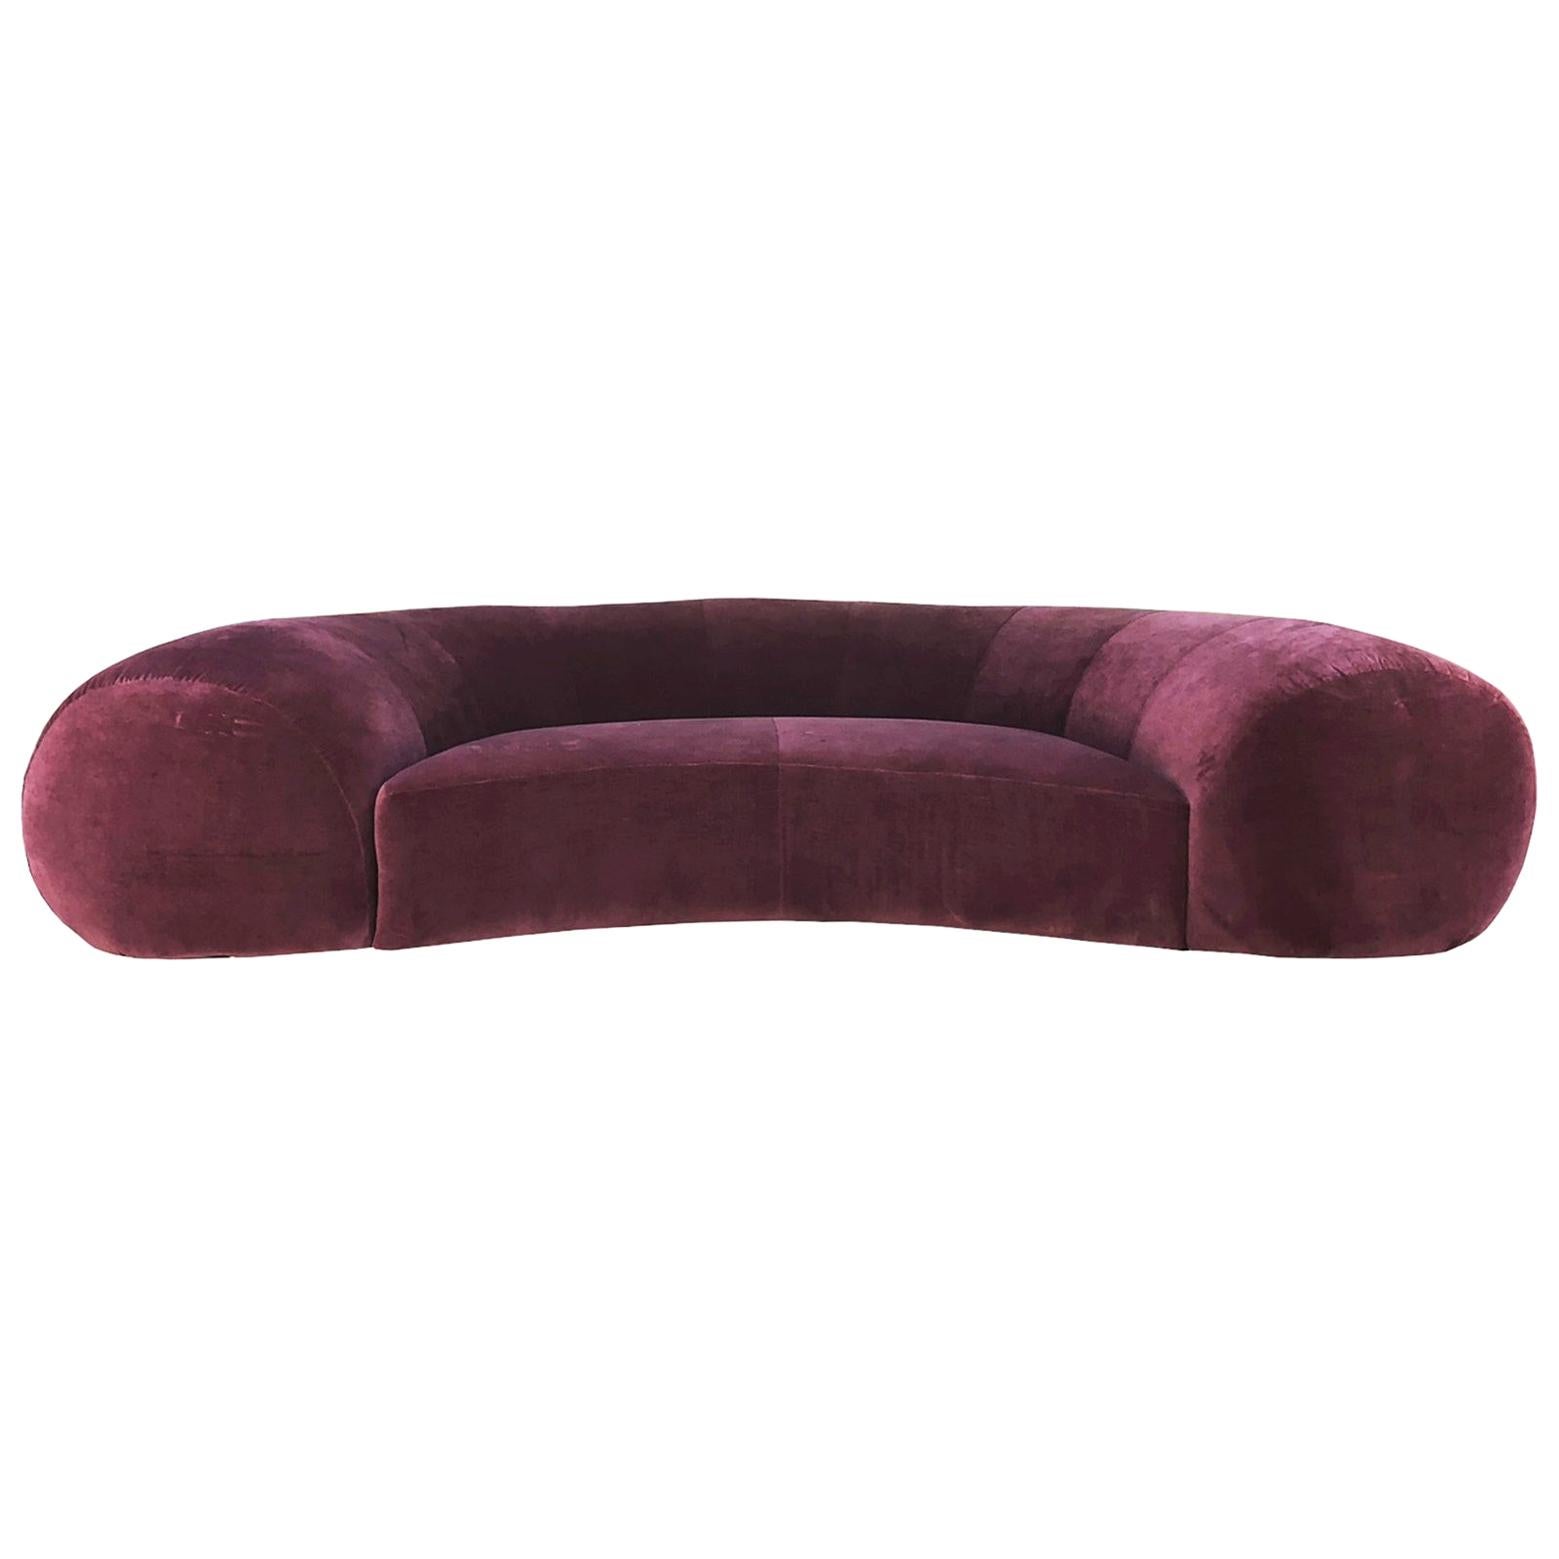 Large Vintage Sofa in a Burgundy Fabric